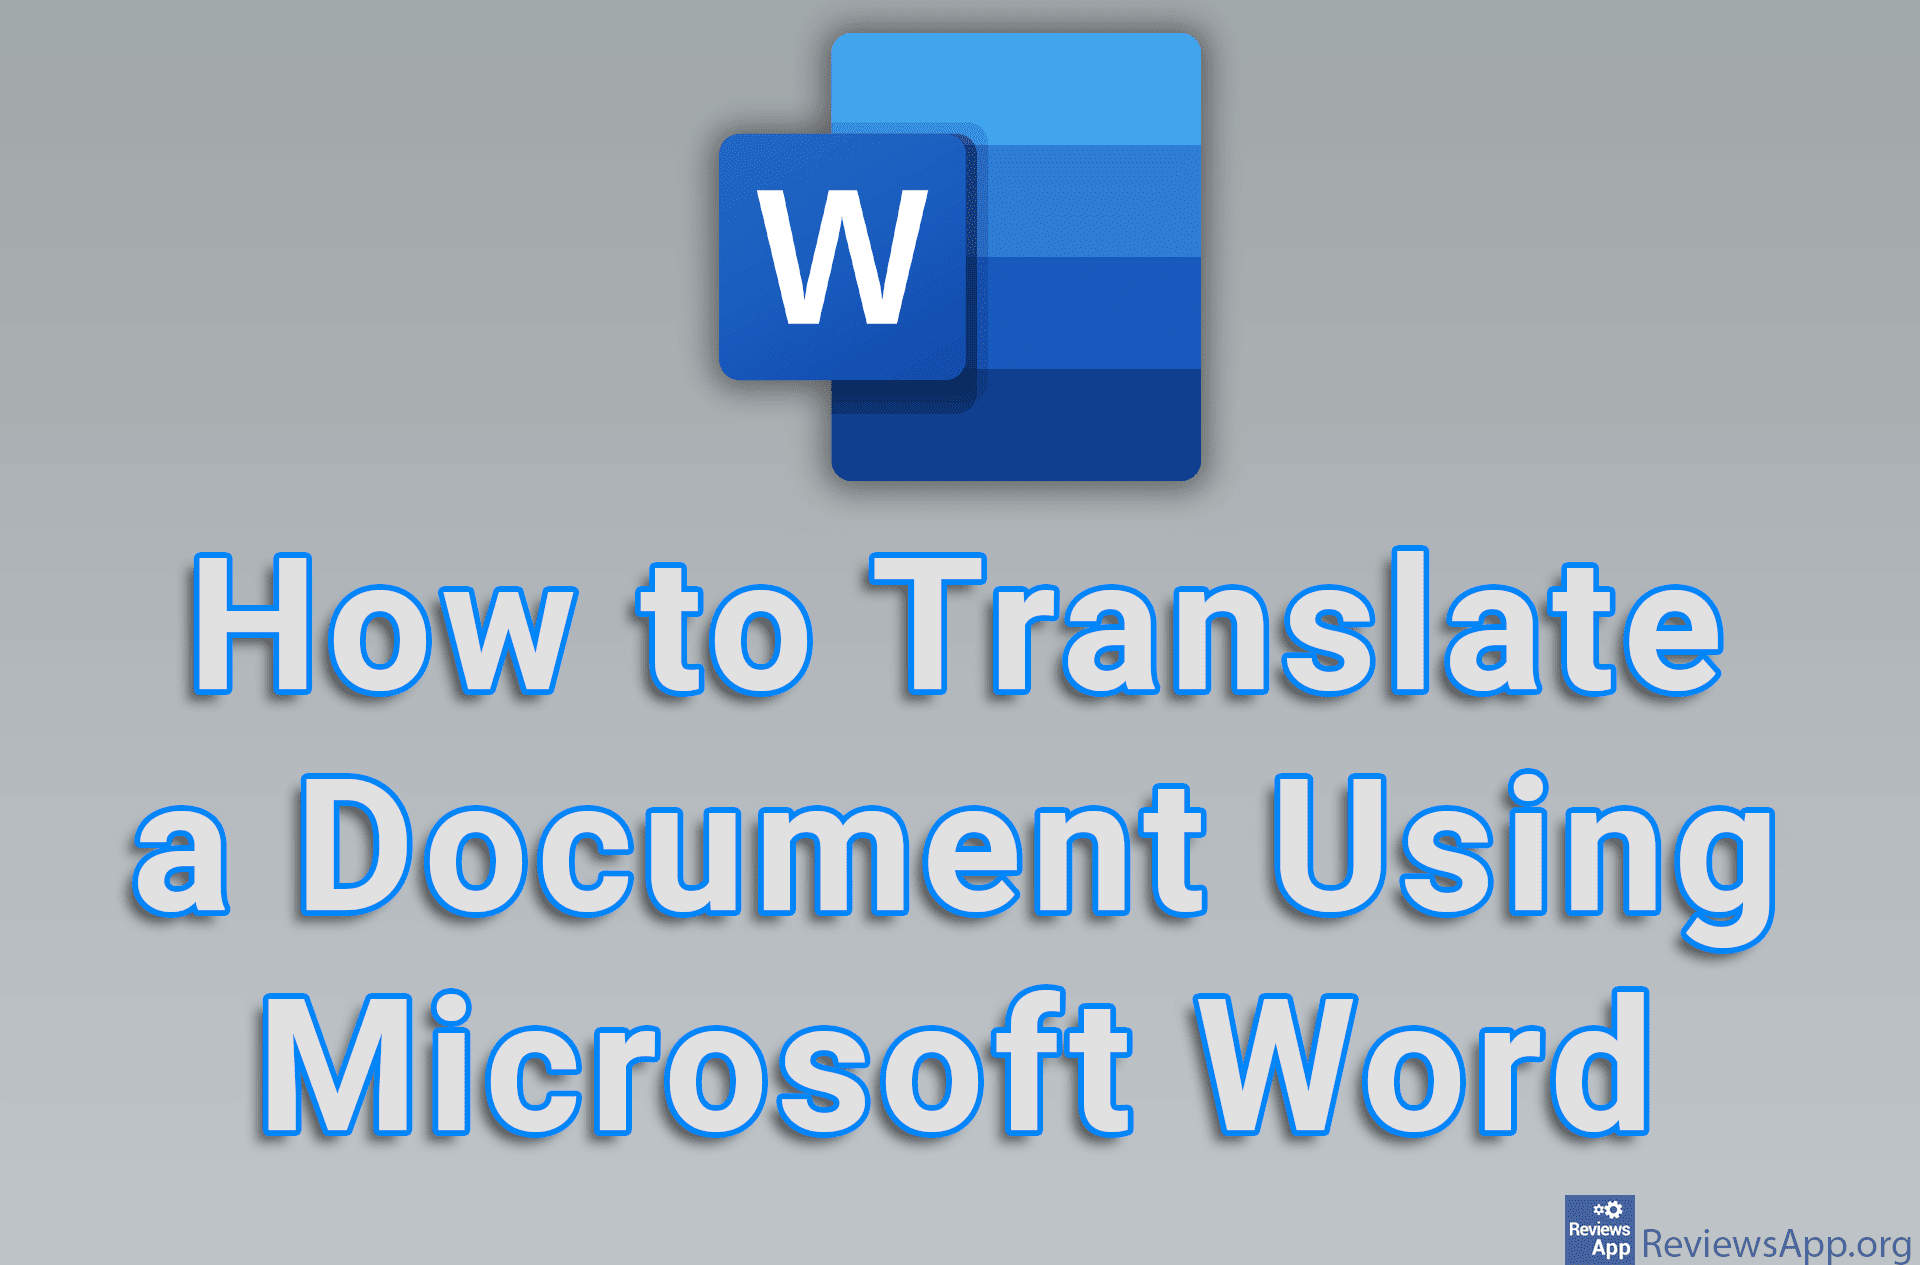 How to Translate a Document Using Microsoft Word